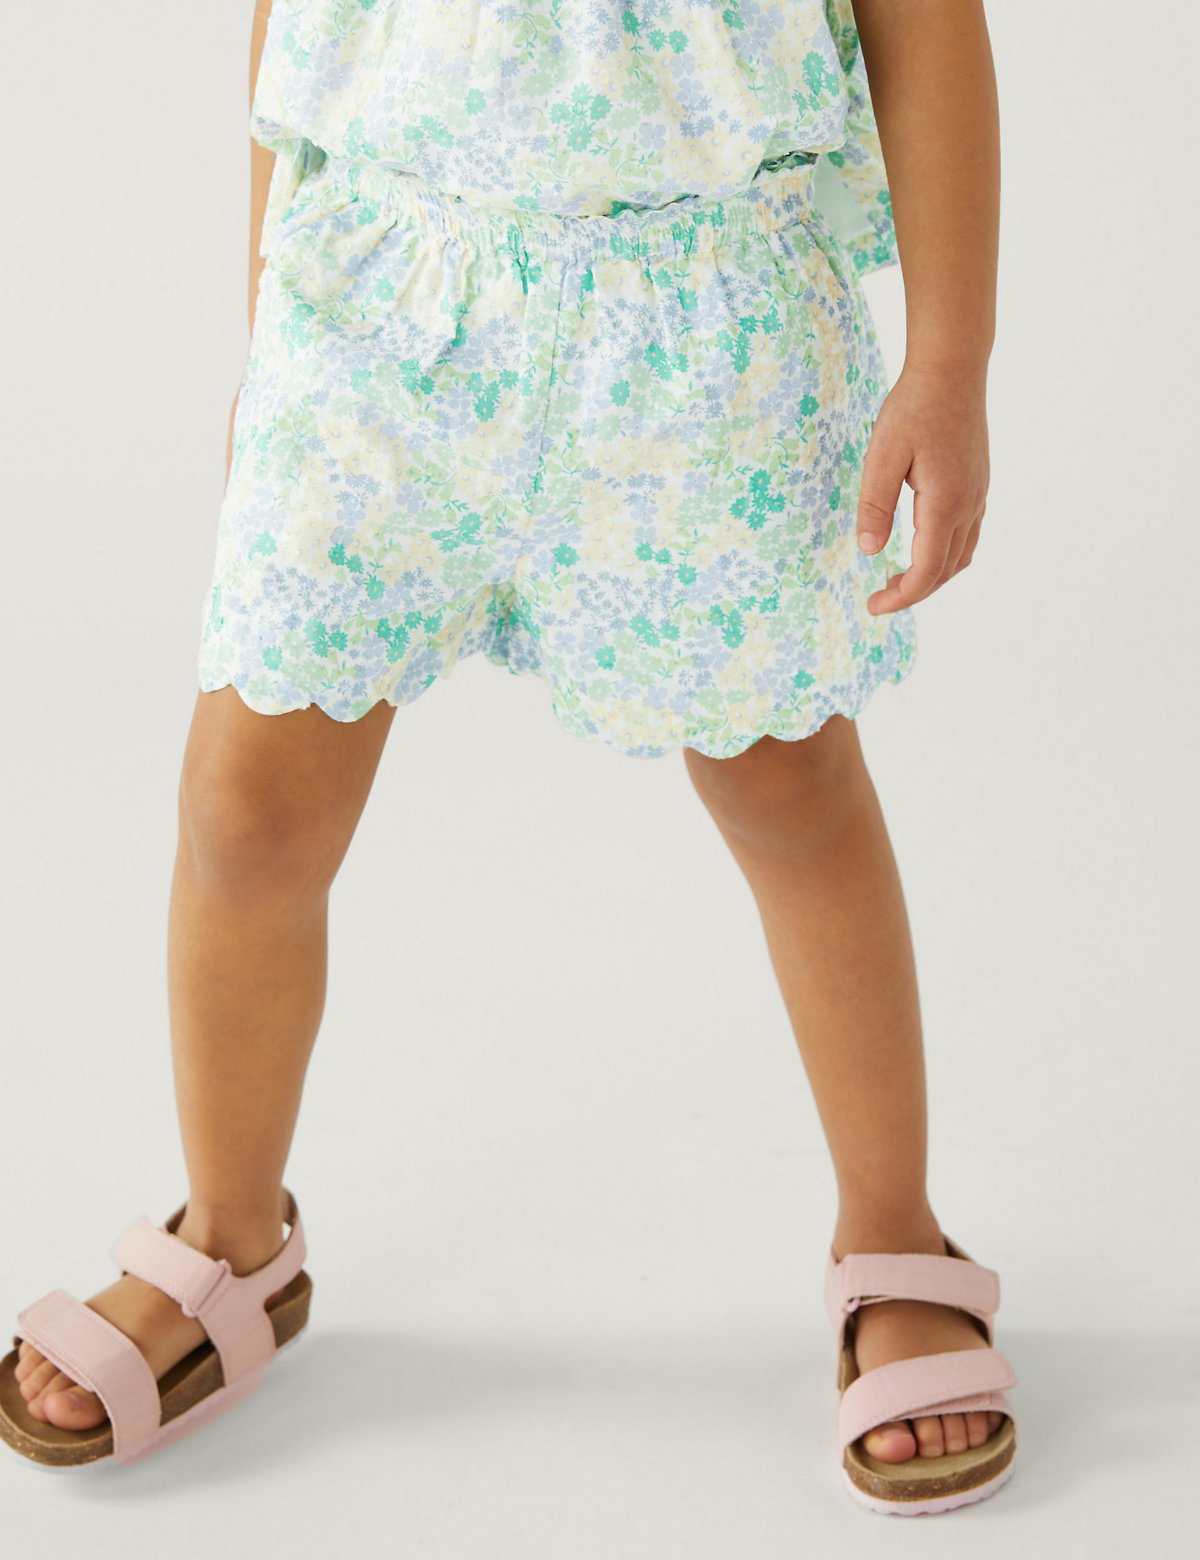 2pc Pure Cotton Floral Top & Bottom Outfit (2-8 Yrs)